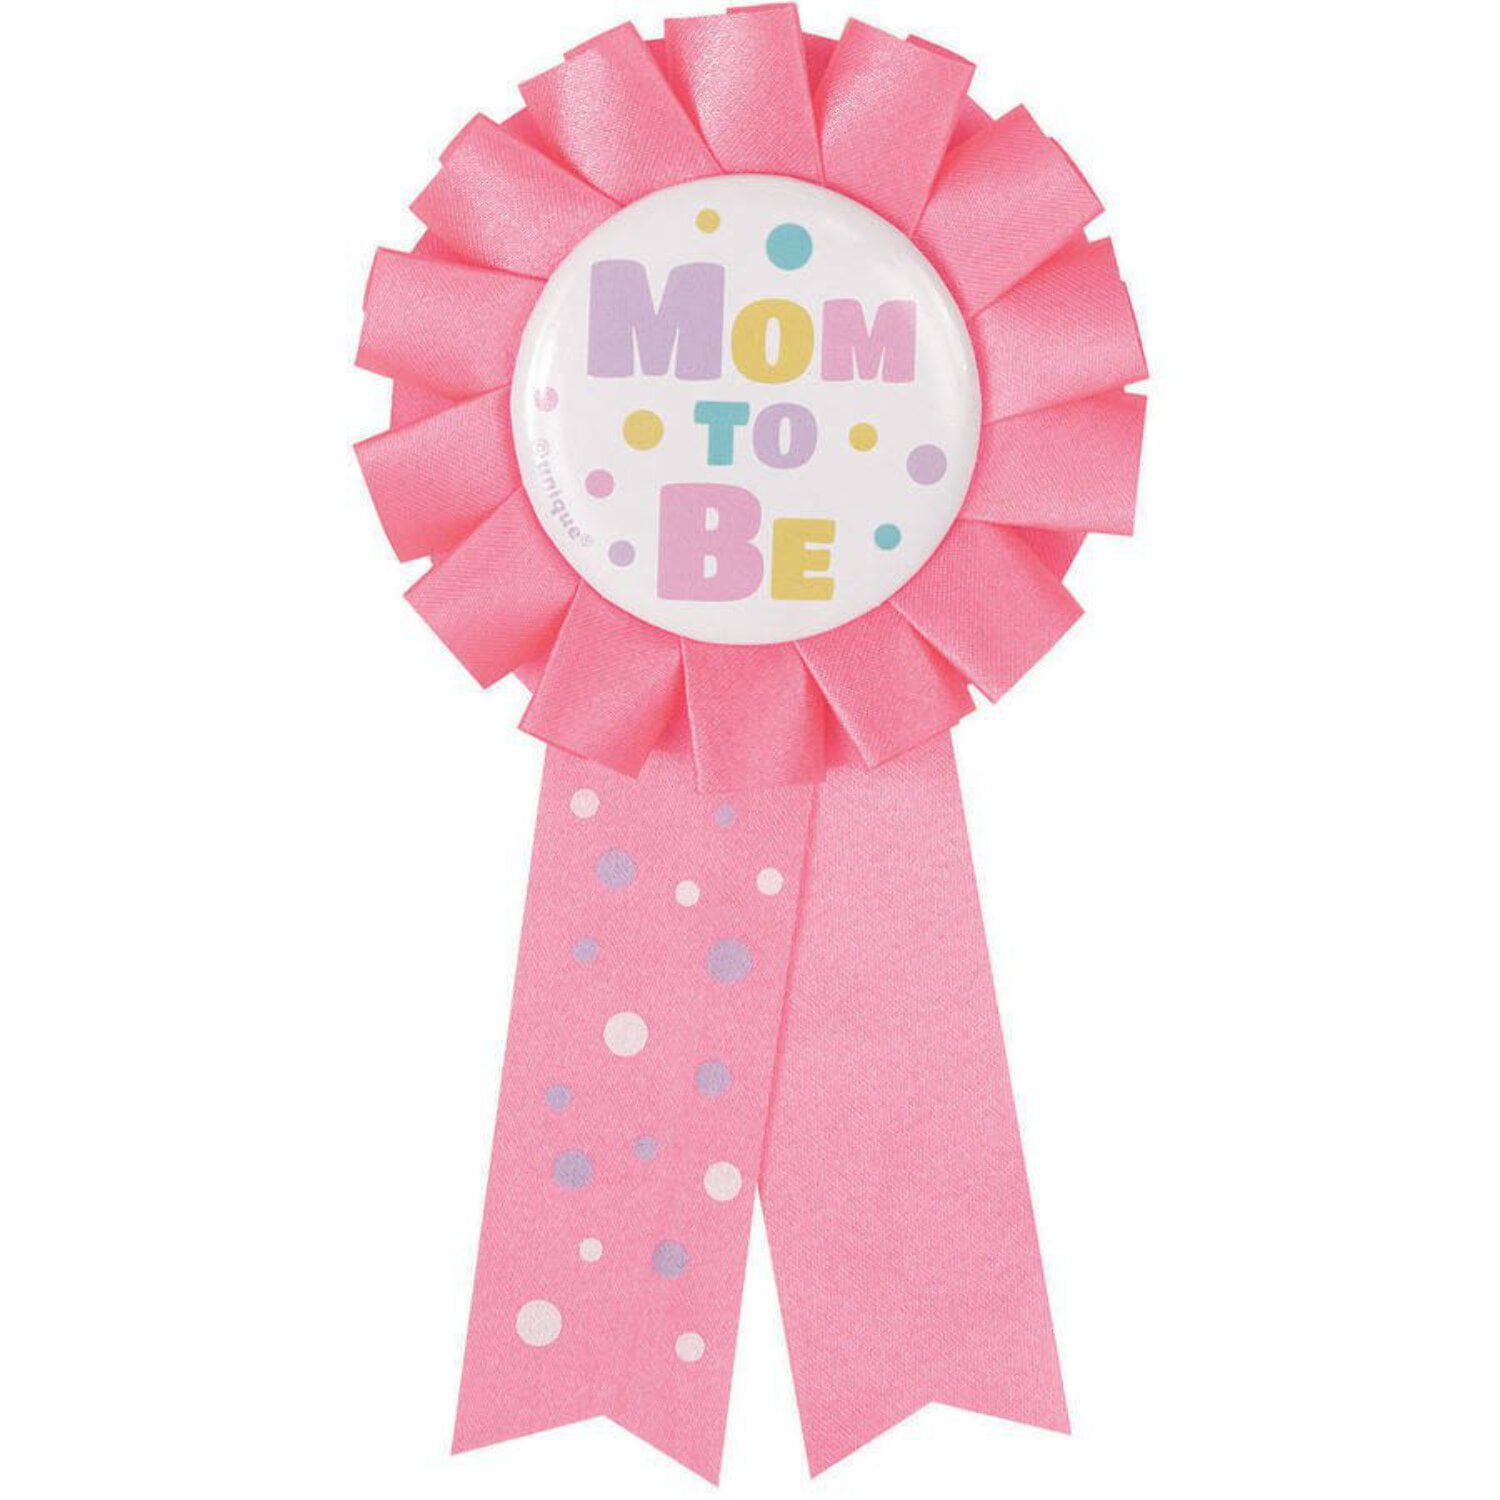 Oh Baby! Quote Satin Baby Shower Ribbon, 7/8-Inch, 10-Yard, Pink